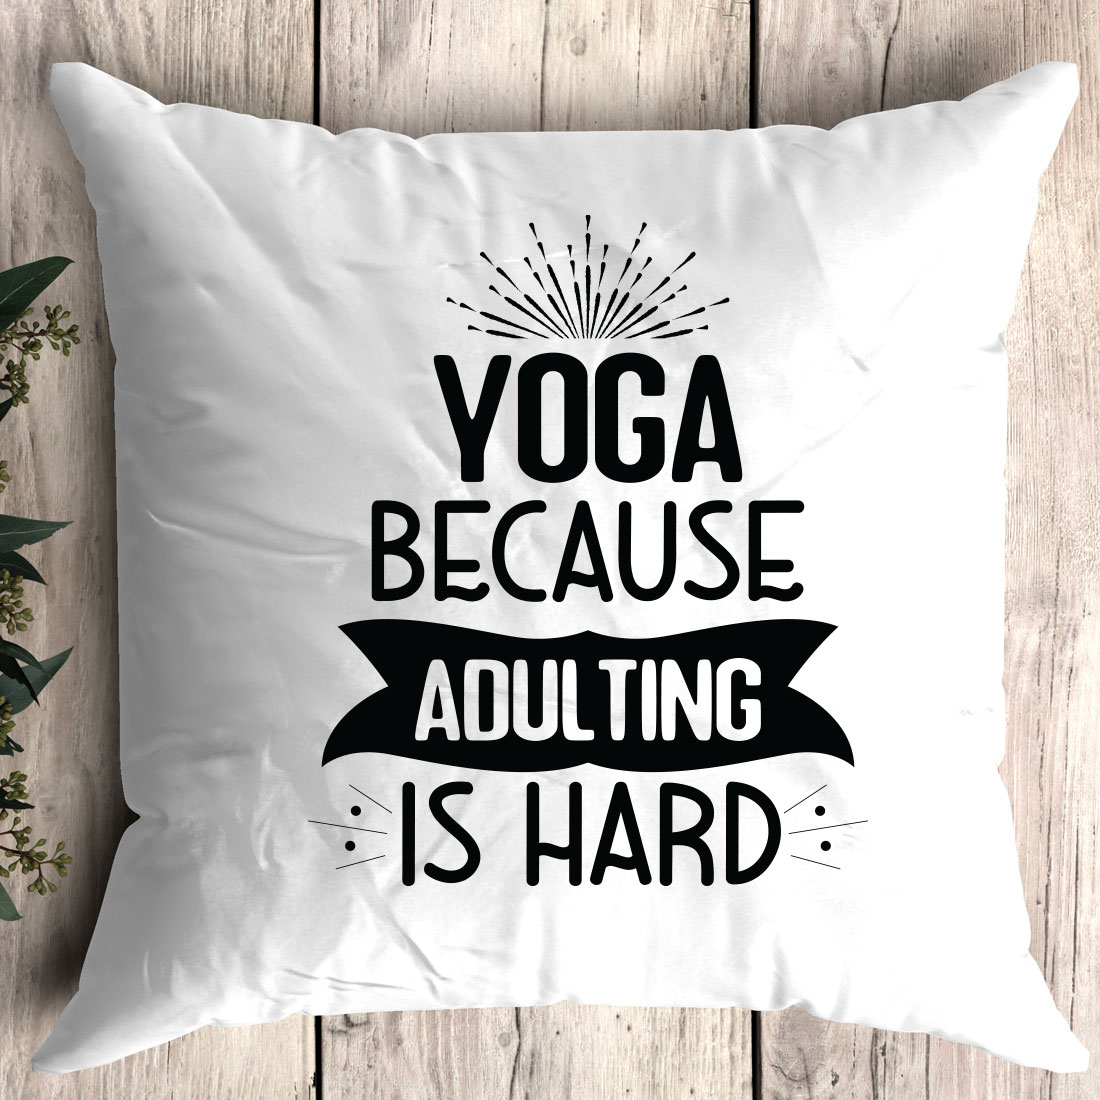 White pillow that says yoga because adulting is hard.